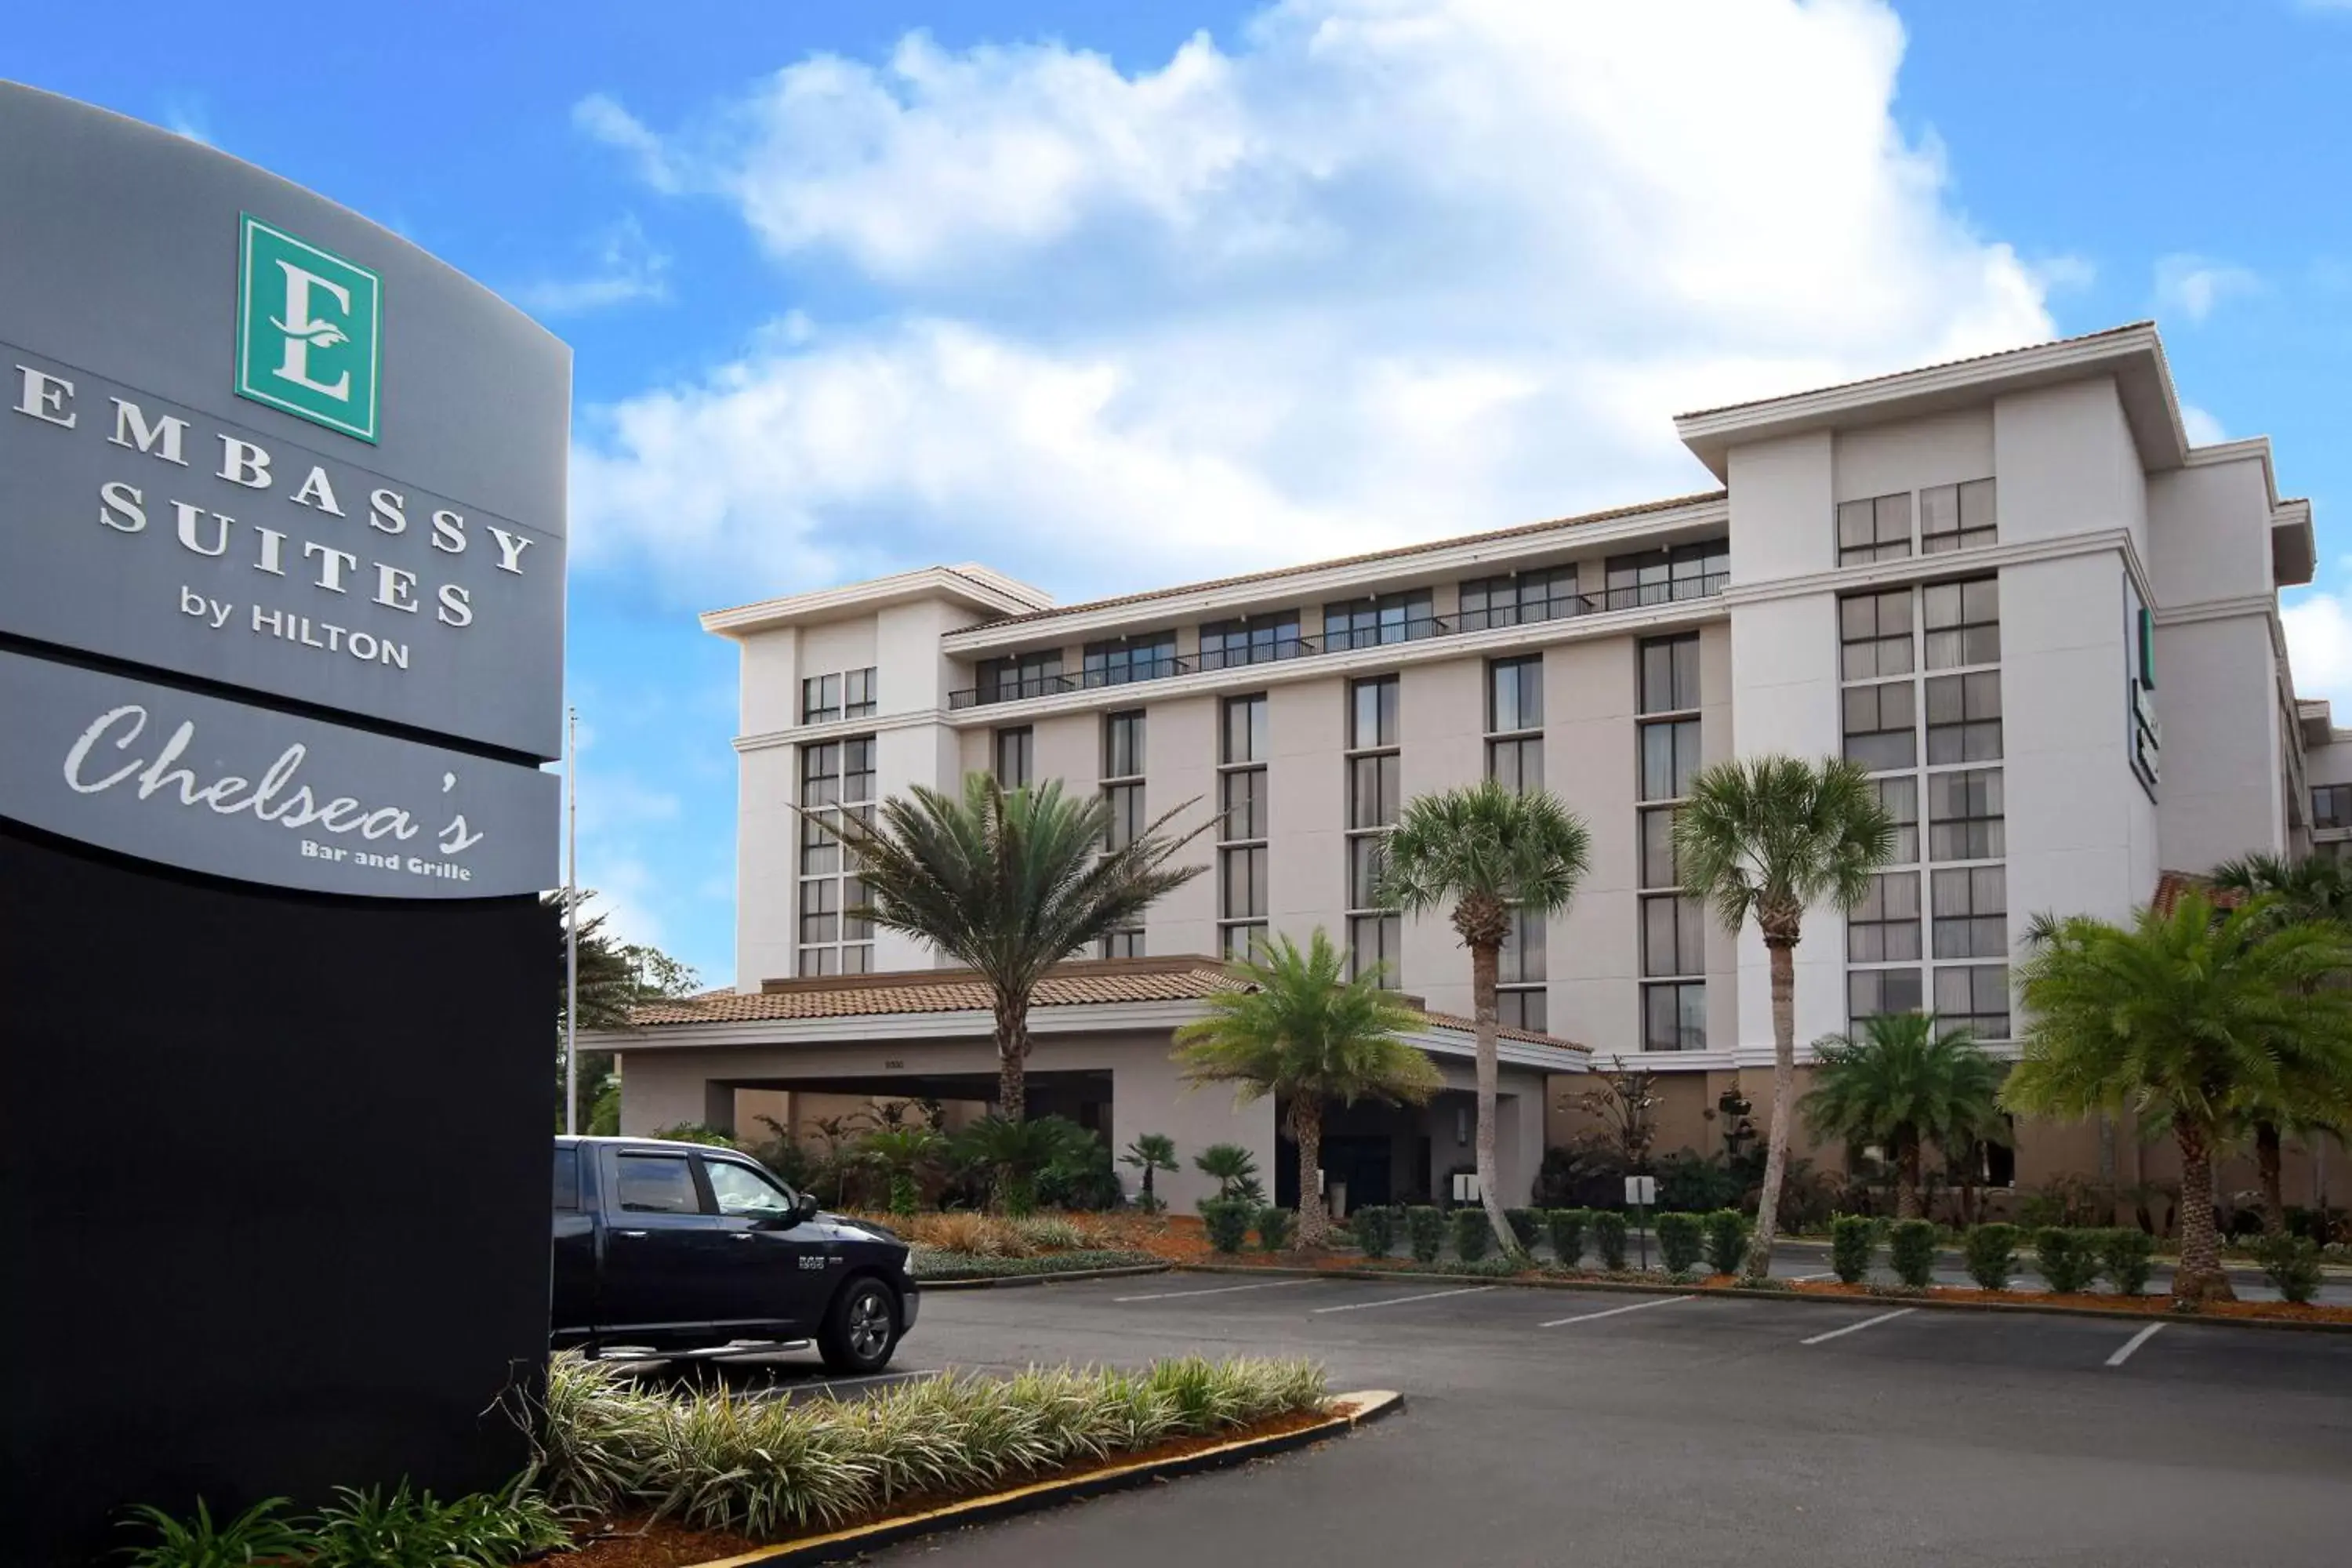 Property Building in Embassy Suites by Hilton Jacksonville Baymeadows